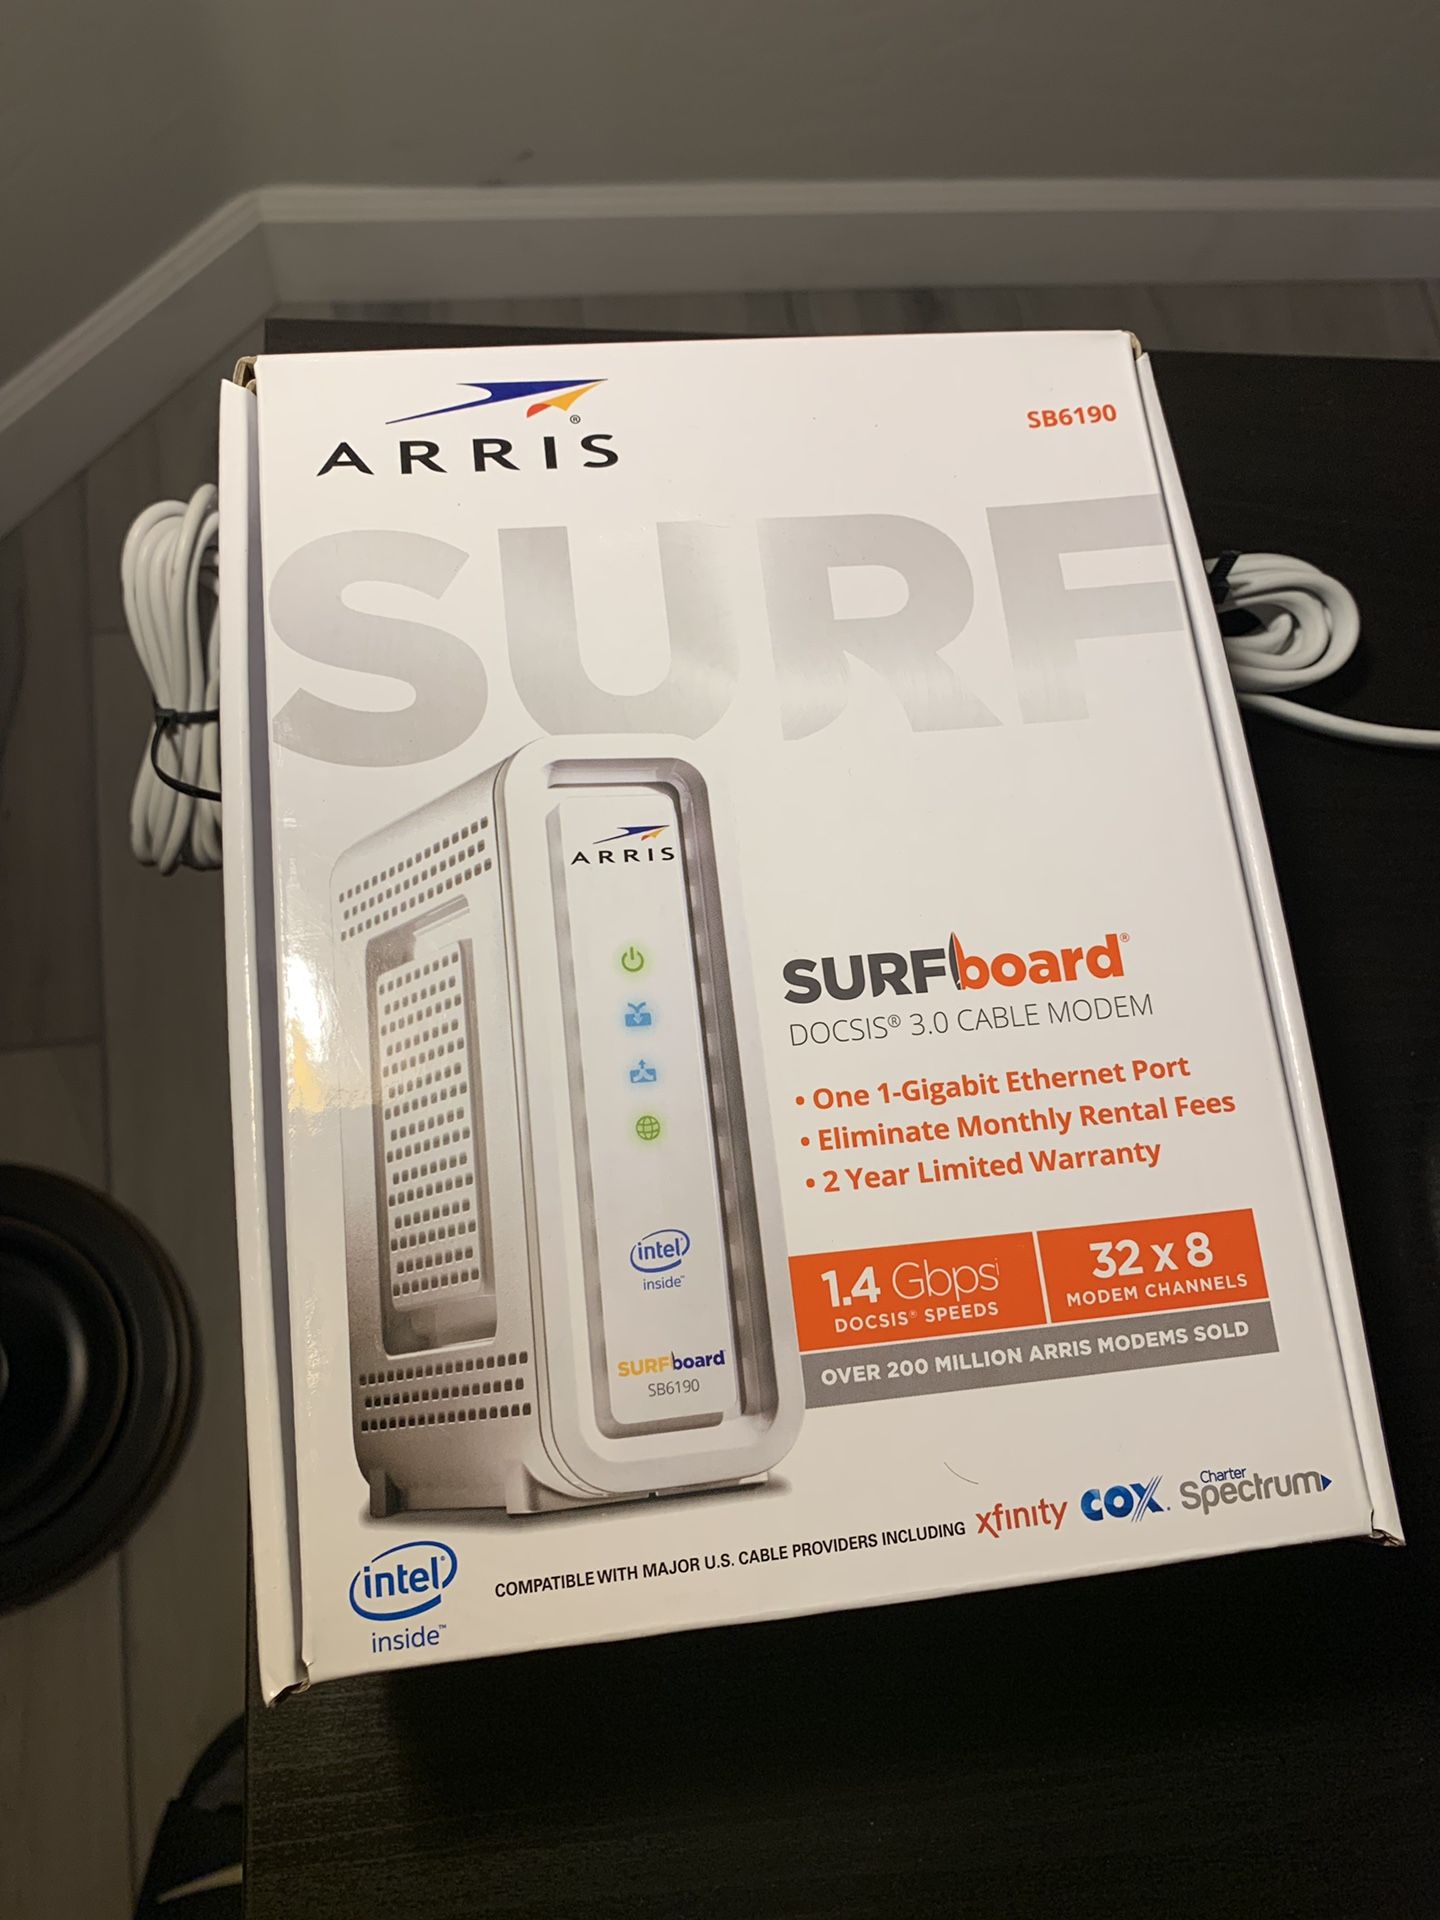 ARRIS SBG6700-AC EXCELLENT MODEM WORKS WITH AMOST ANY PROVIDER INCLUDING COX